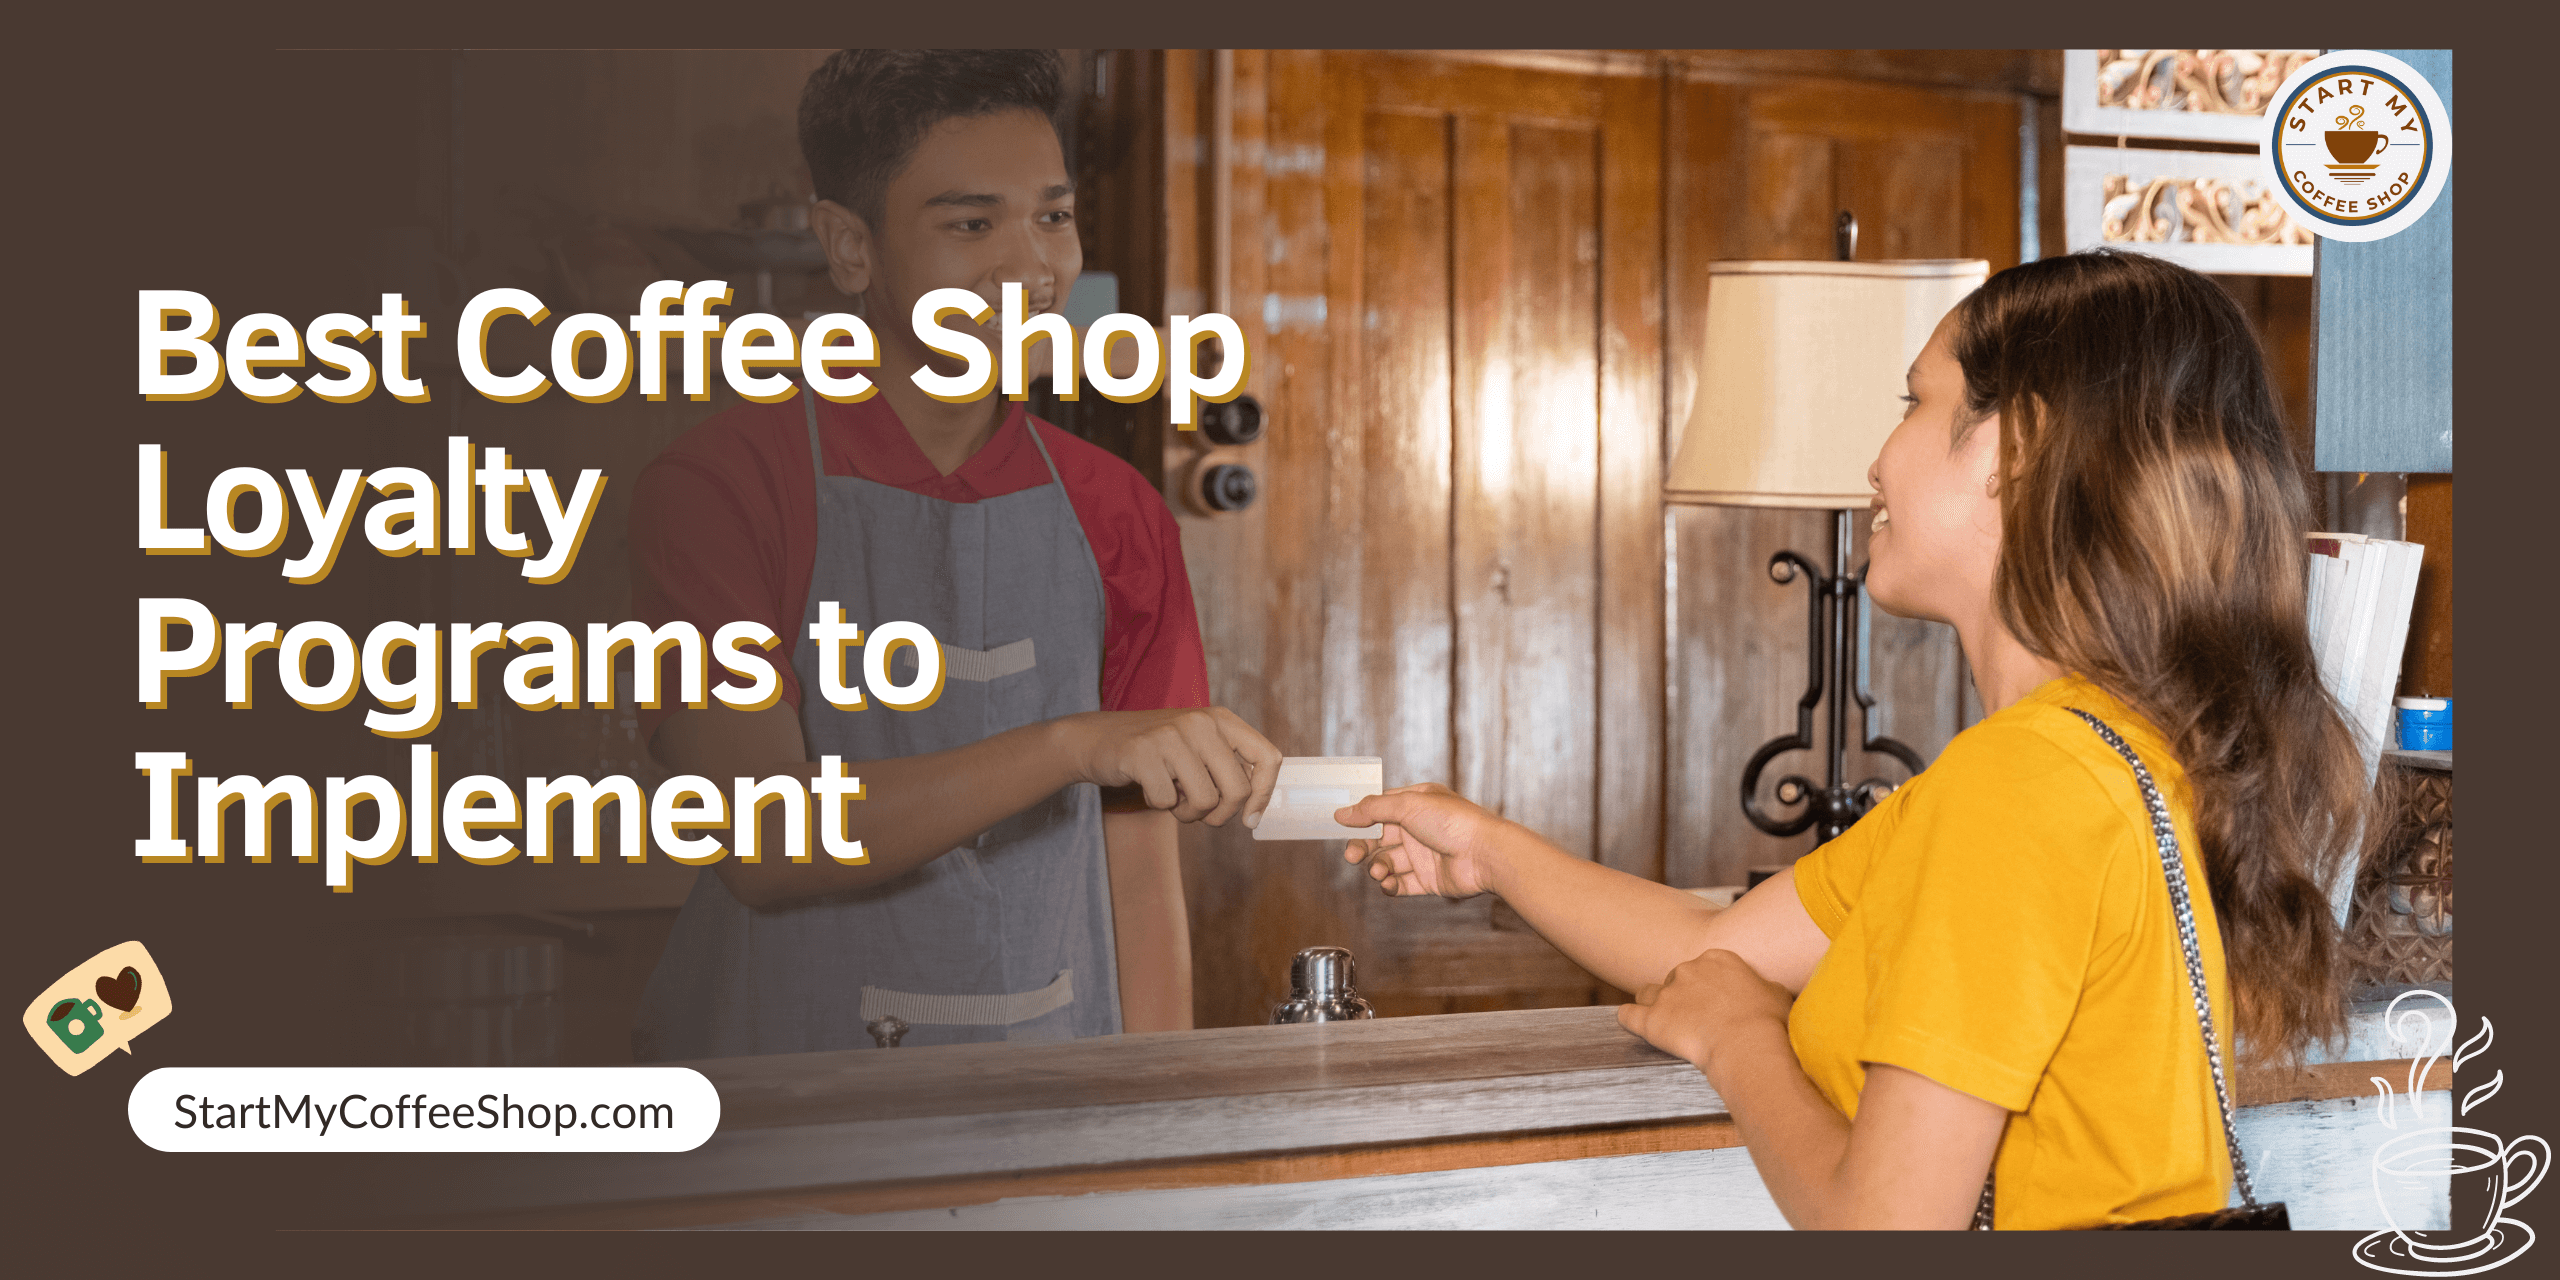 coffee and cake shop business plan